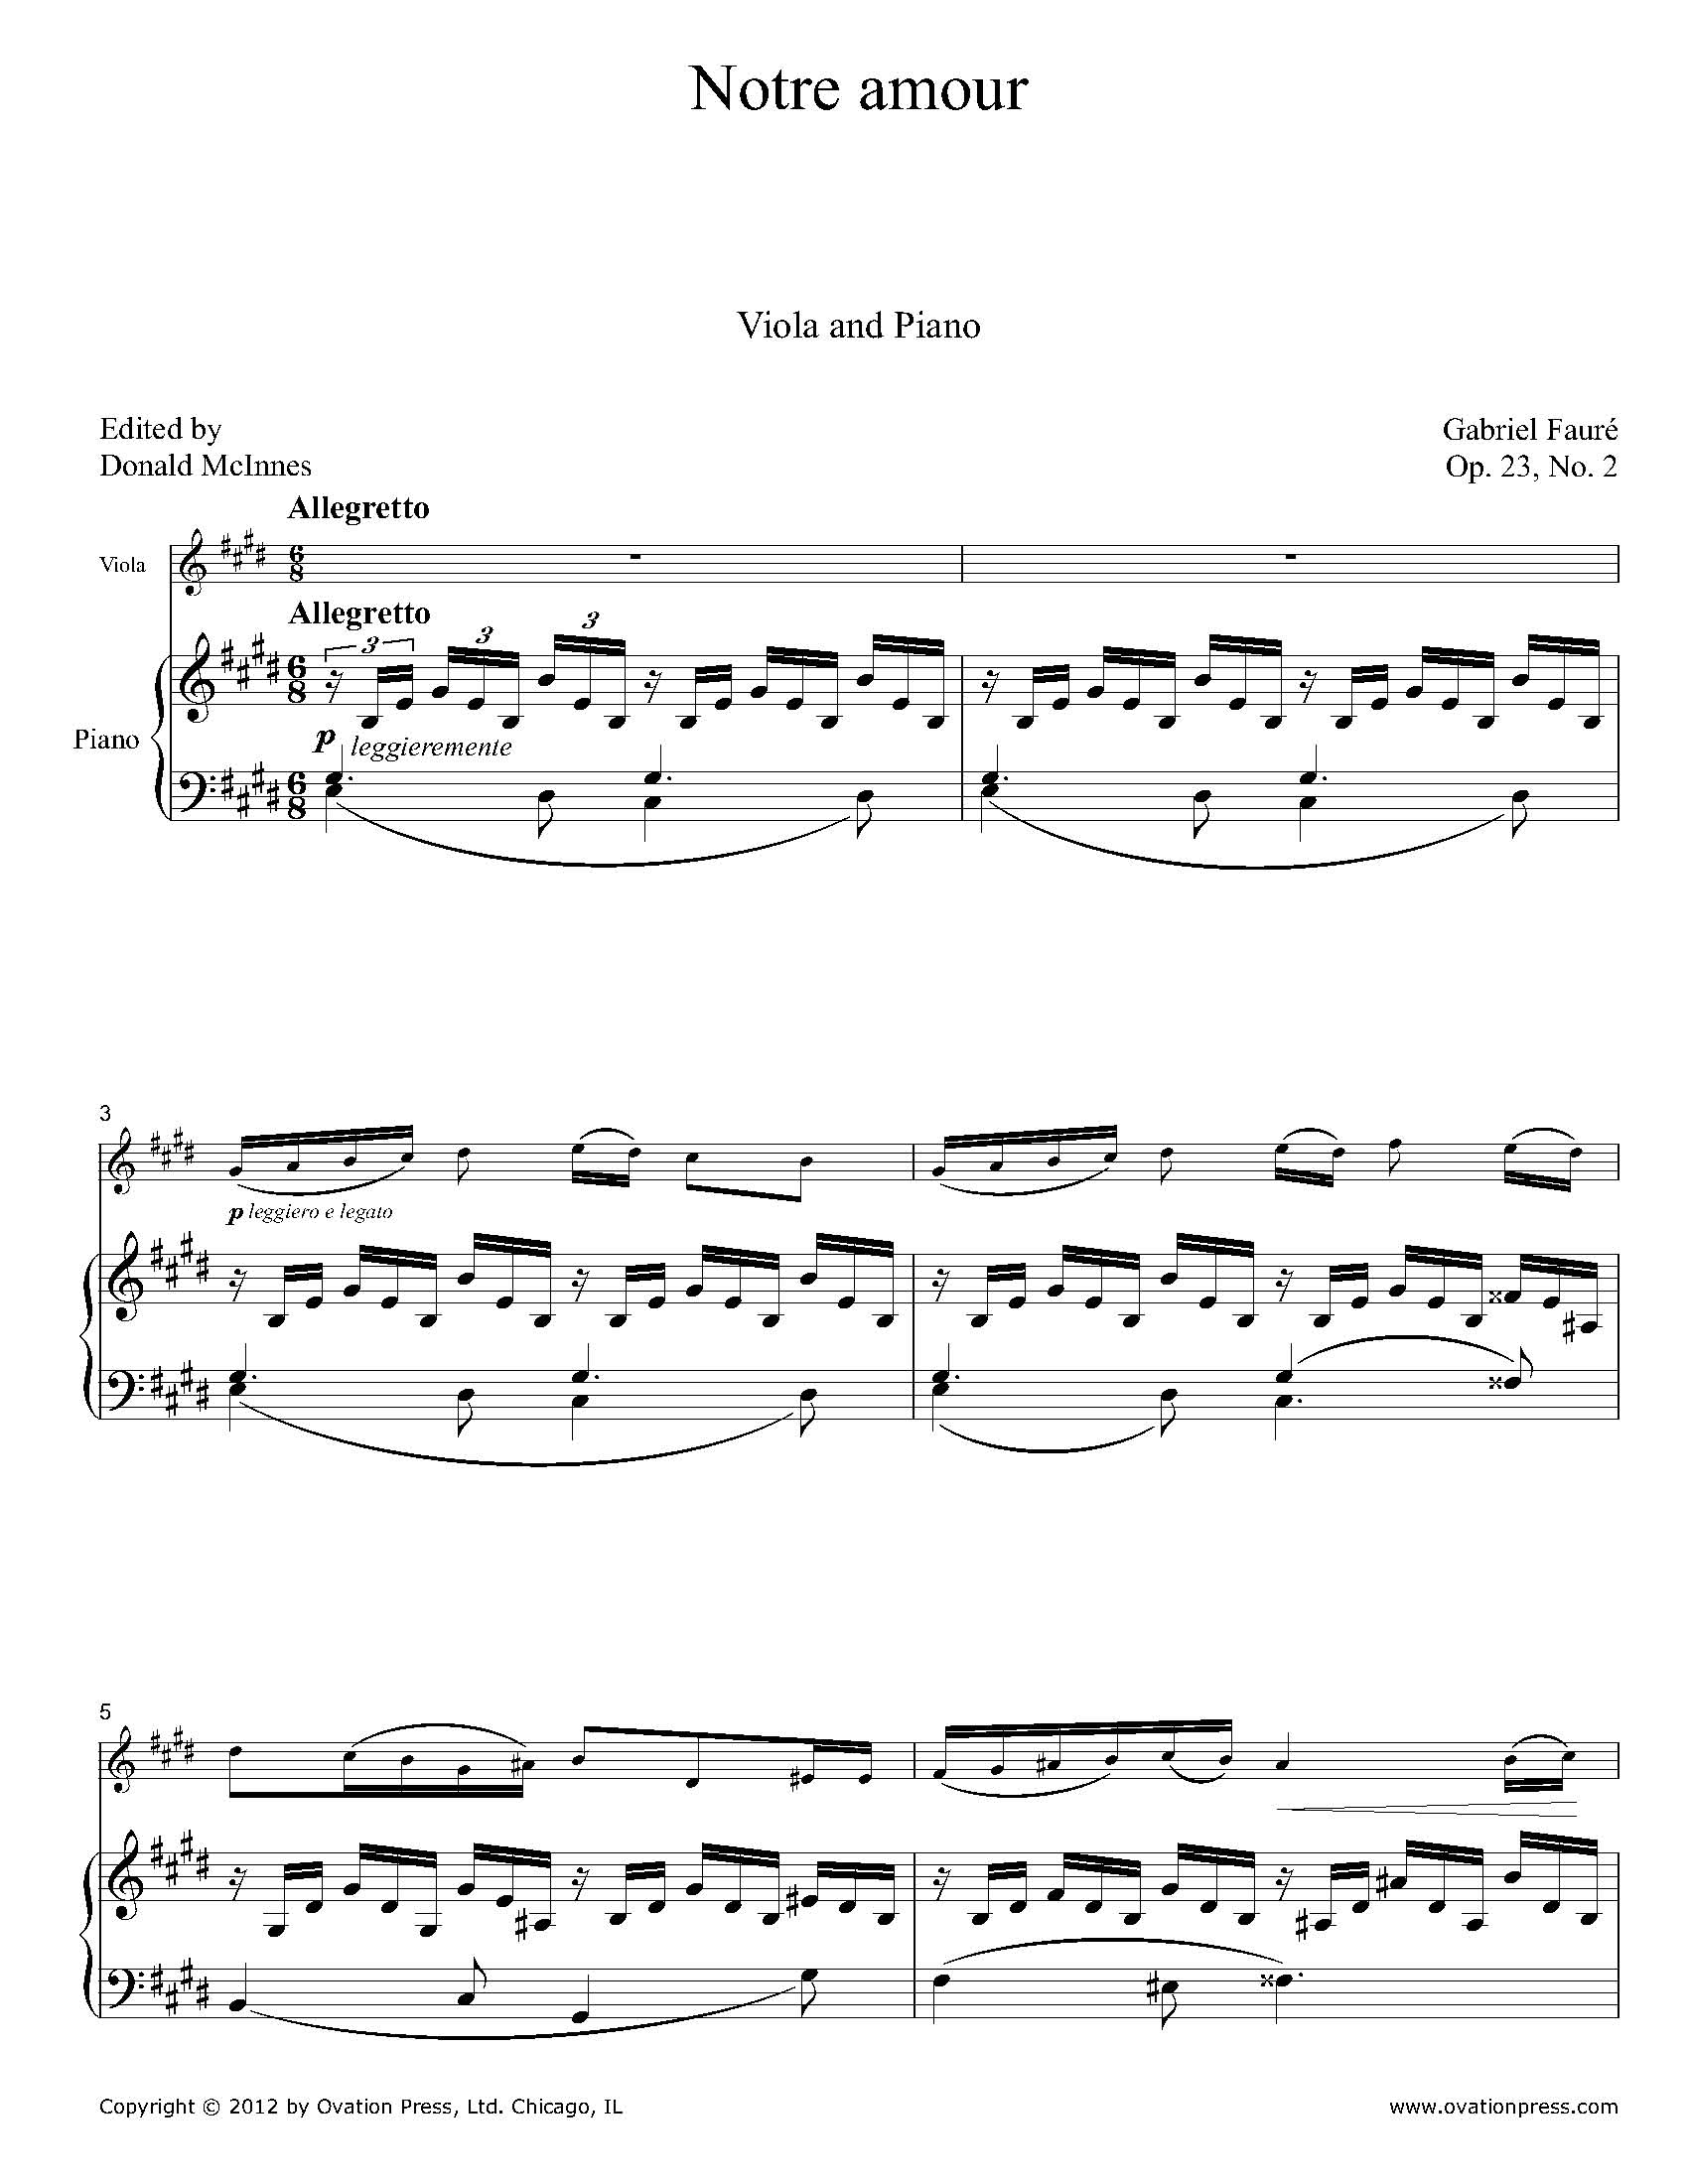 Fauré Notre amour for Viola and Piano